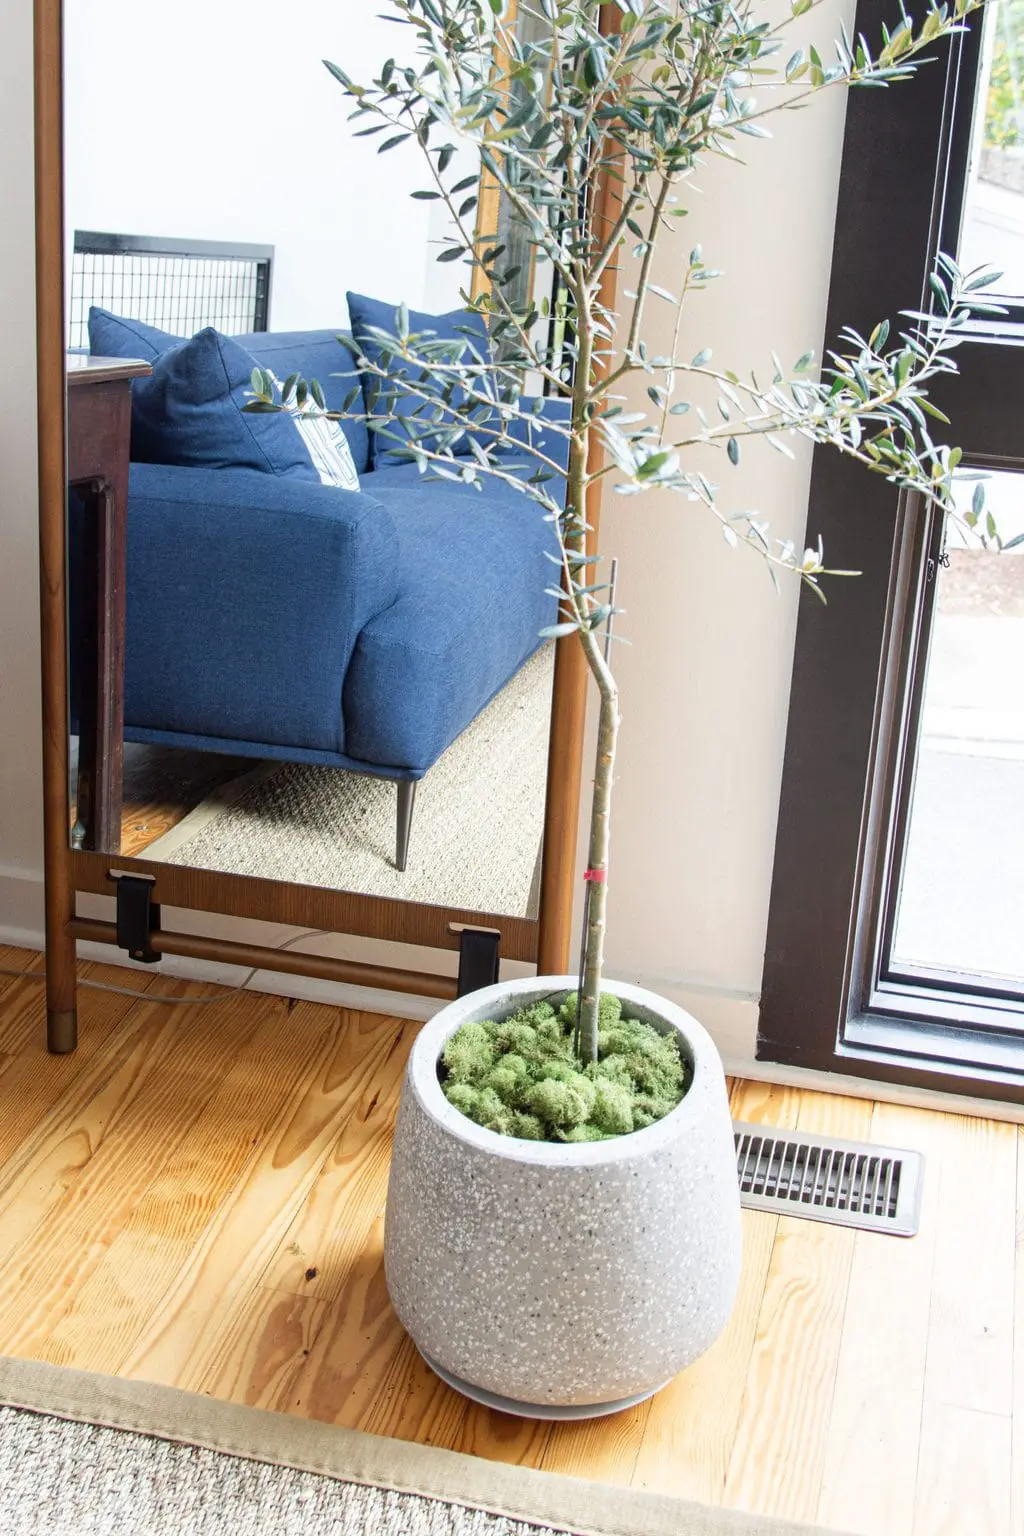 Modern Terrazzo planter with indoor olive tree and leaning floor mirror, townhouse design ideas by Kevin O'Gara on Thou Swell #article #myarticle #abiskosofa #bluesofa #moderndesign #livingroom #livingroomdesign #homedecor #homedecorideas